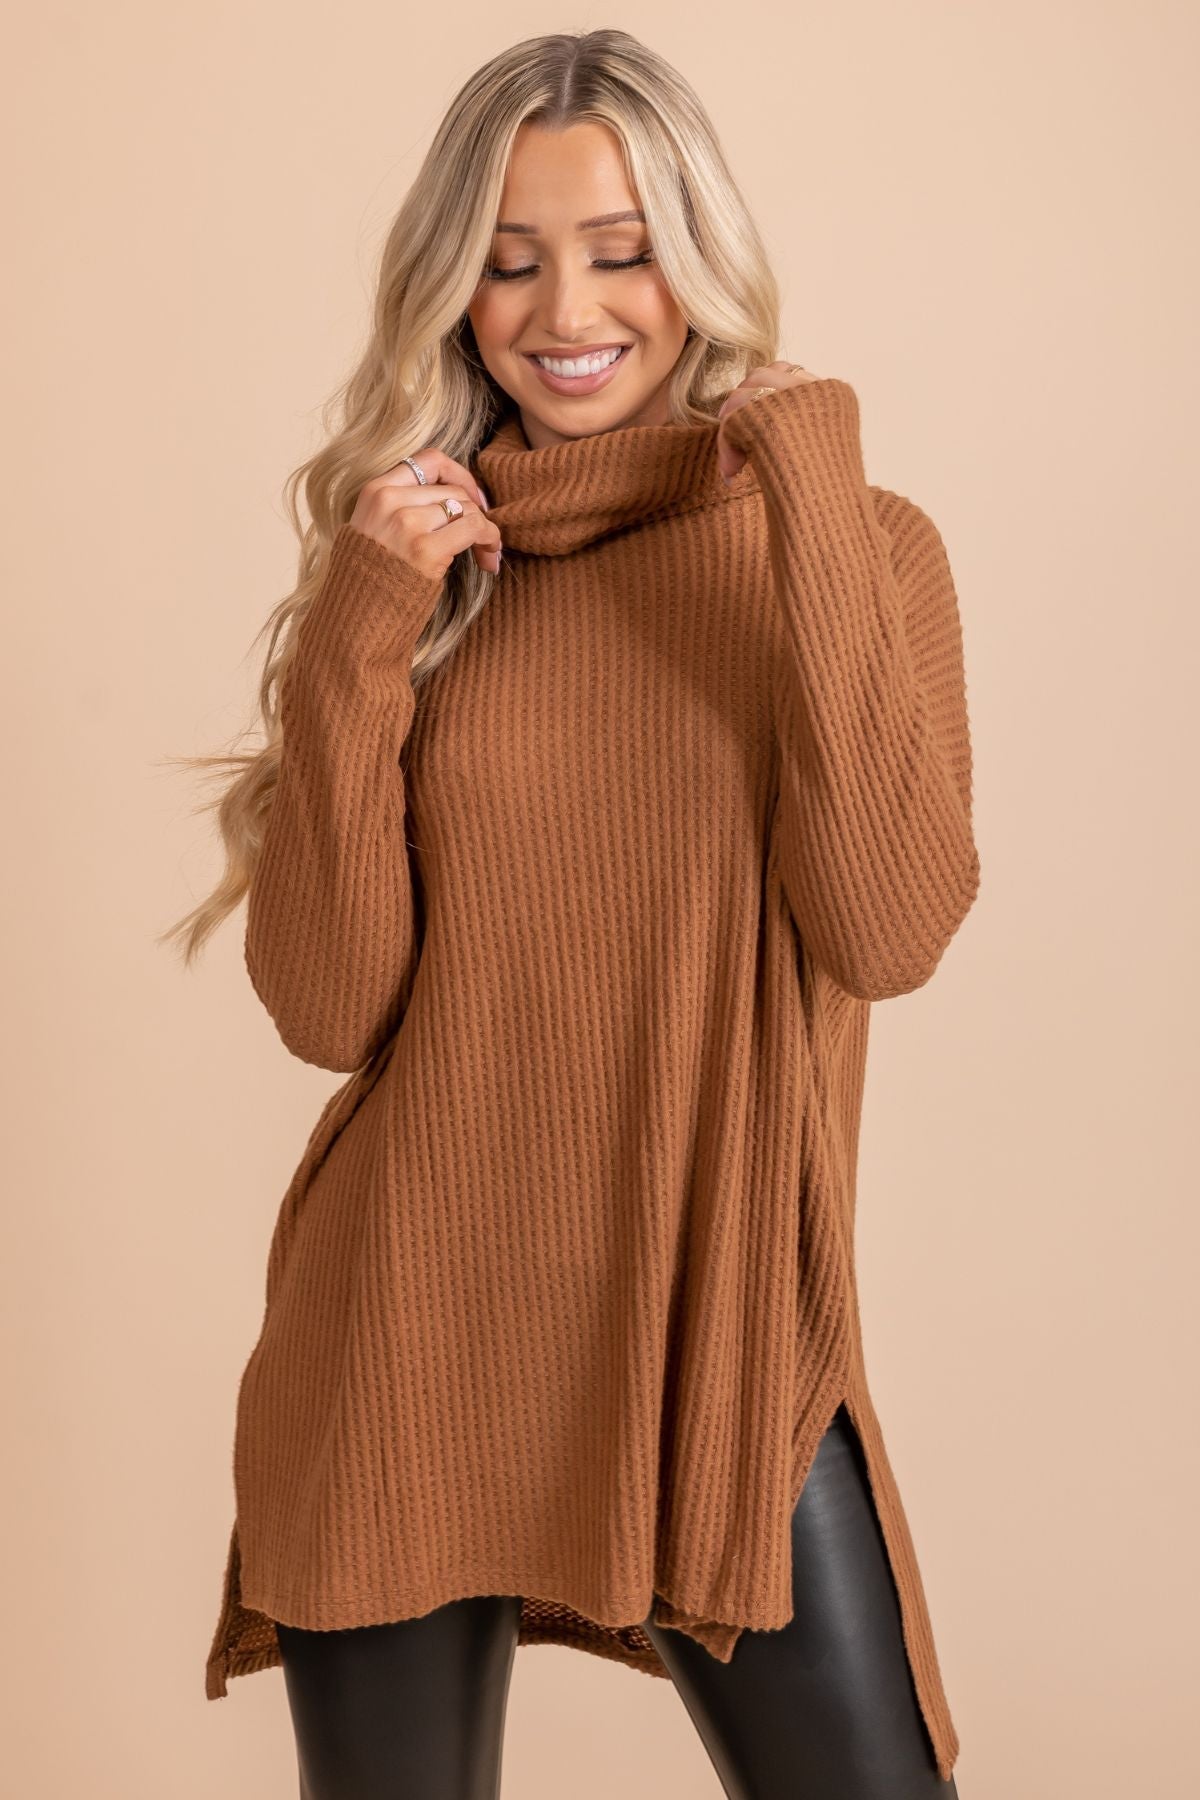 Easy Find Taupe Brown Waffle Knit Sweater  Waffle knit sweater, Knitted  top outfit, Sweaters